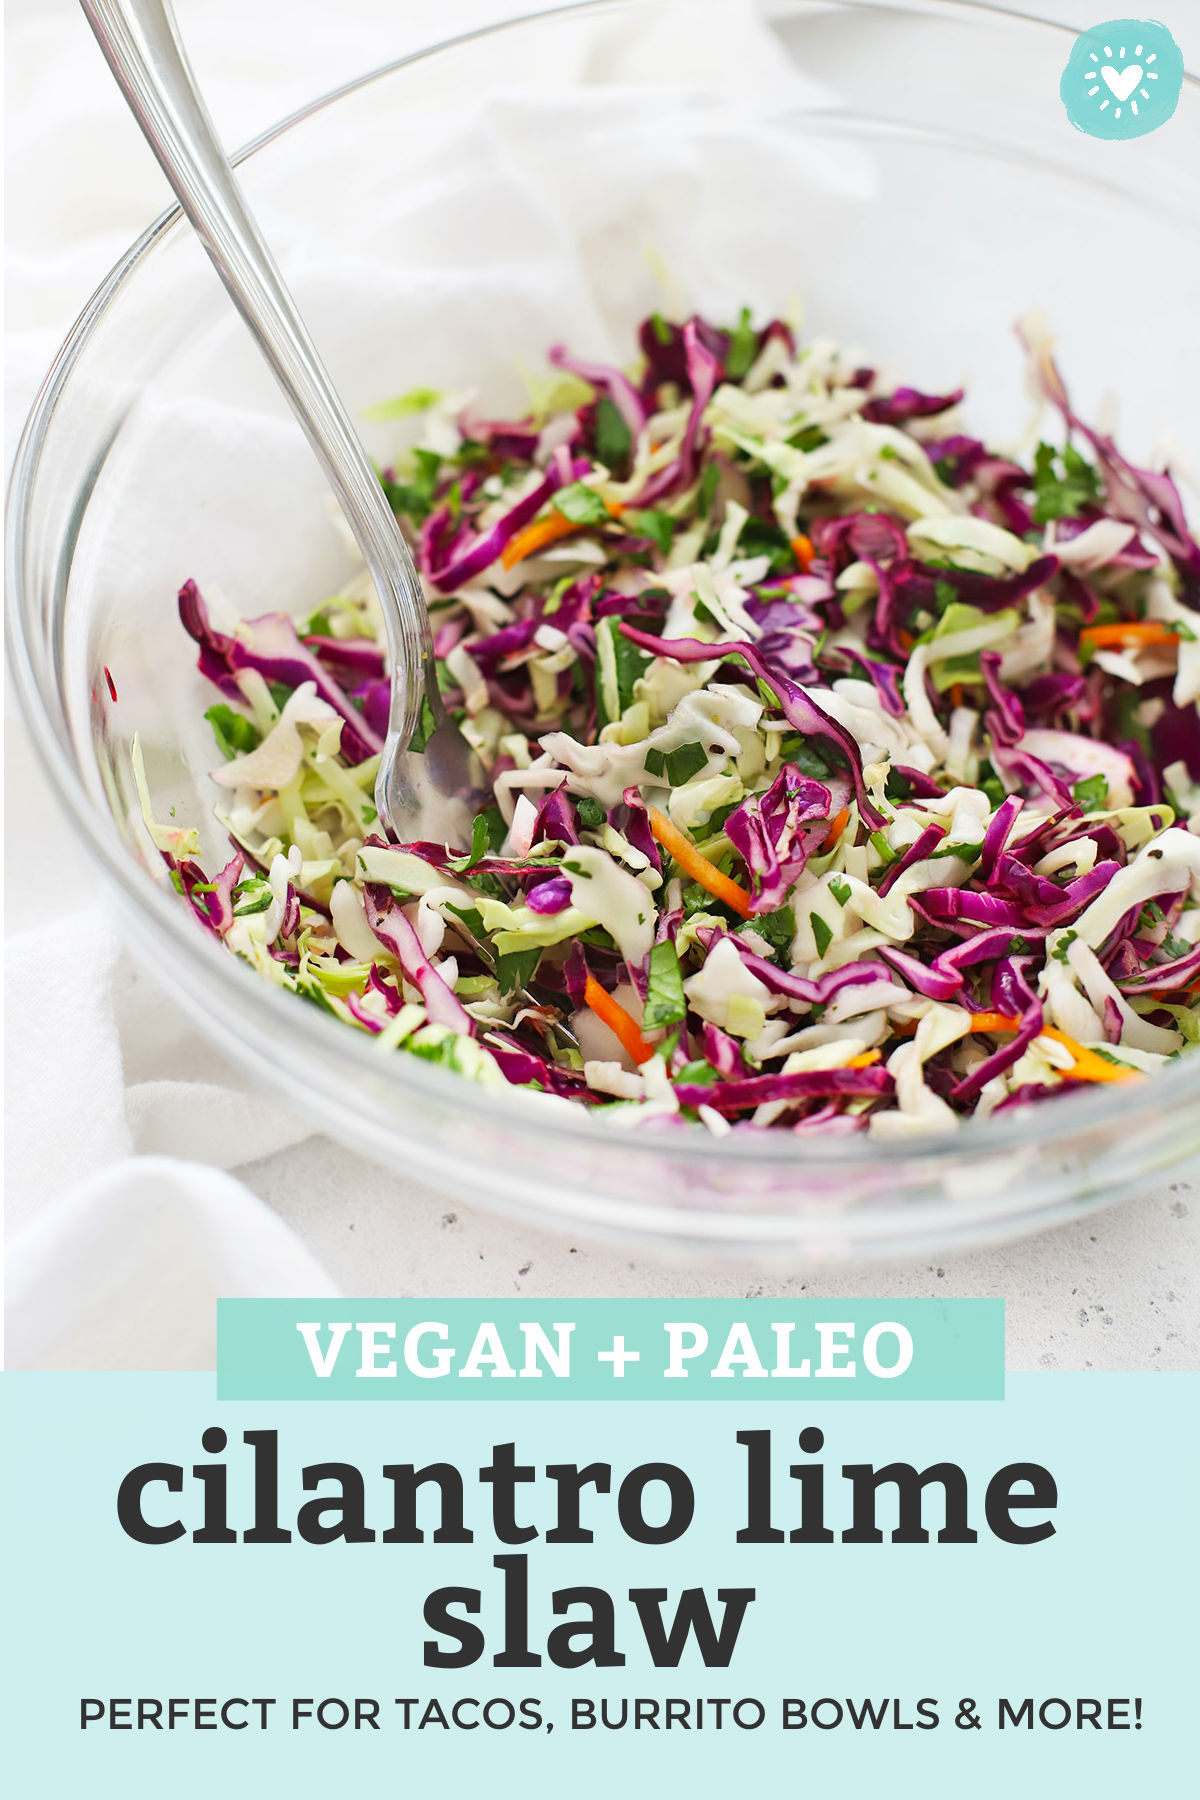 Freshly mixed Cilantro Lime Slaw in a Glass Bowl with text overlay that reads "Vegan + Paleo Cilantro Lime Slaw. Perfect for tacos, burrito bowls, and more!"